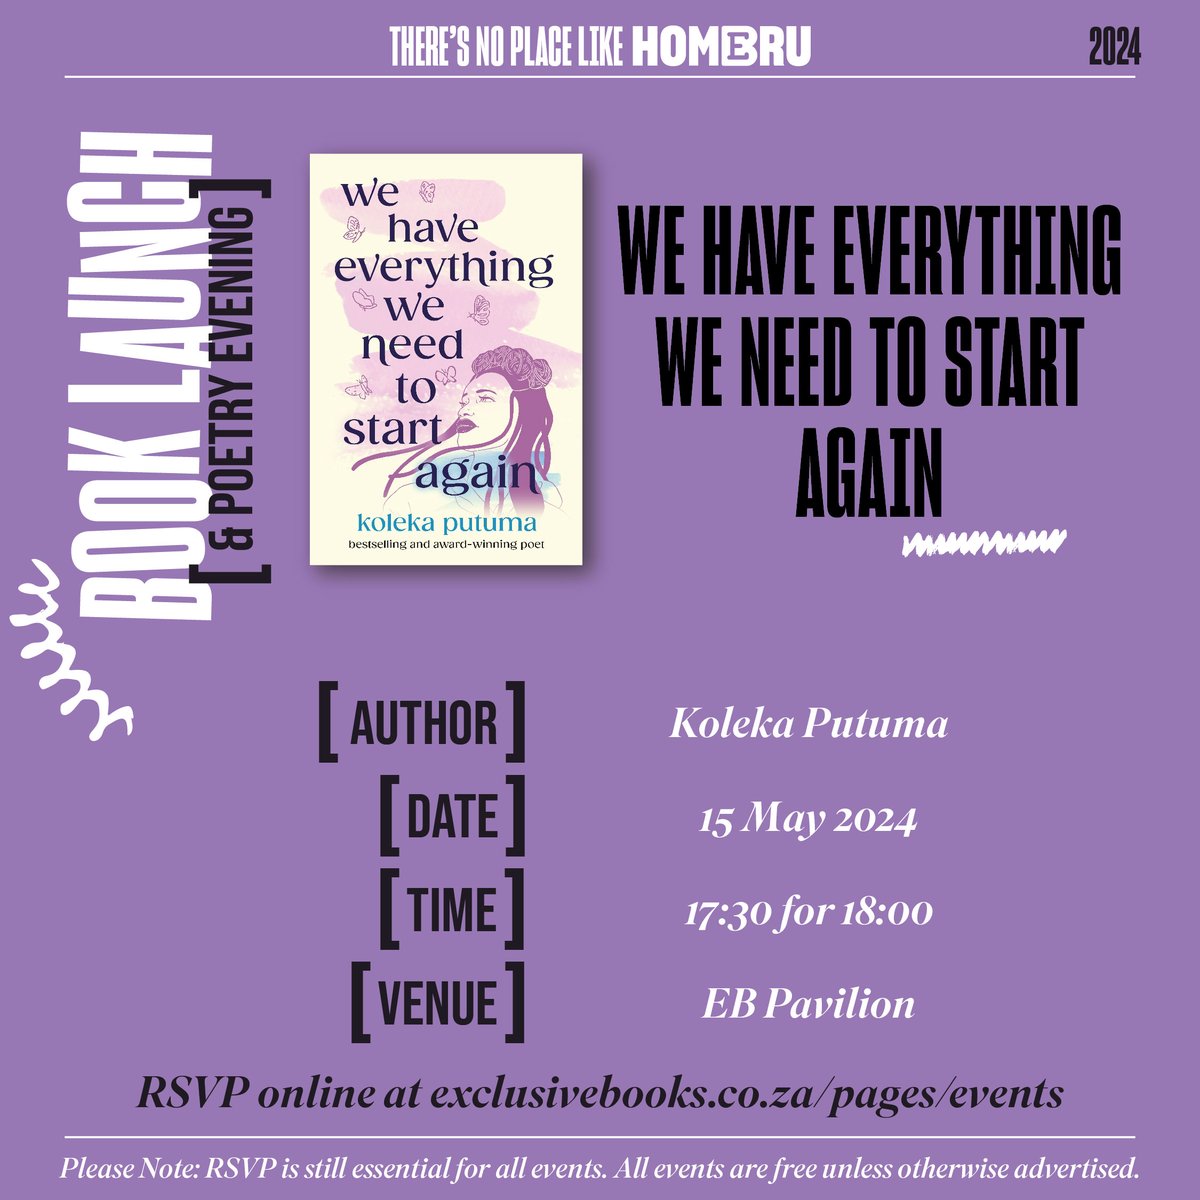 📌Join us for the launch of Koleka Putuma's latest poetry collection, We Have Everything We Need to Start Again, at Exclusive Books Pavilion. Experience the power of words at Koleka Putuma's poetry evening. See you there!